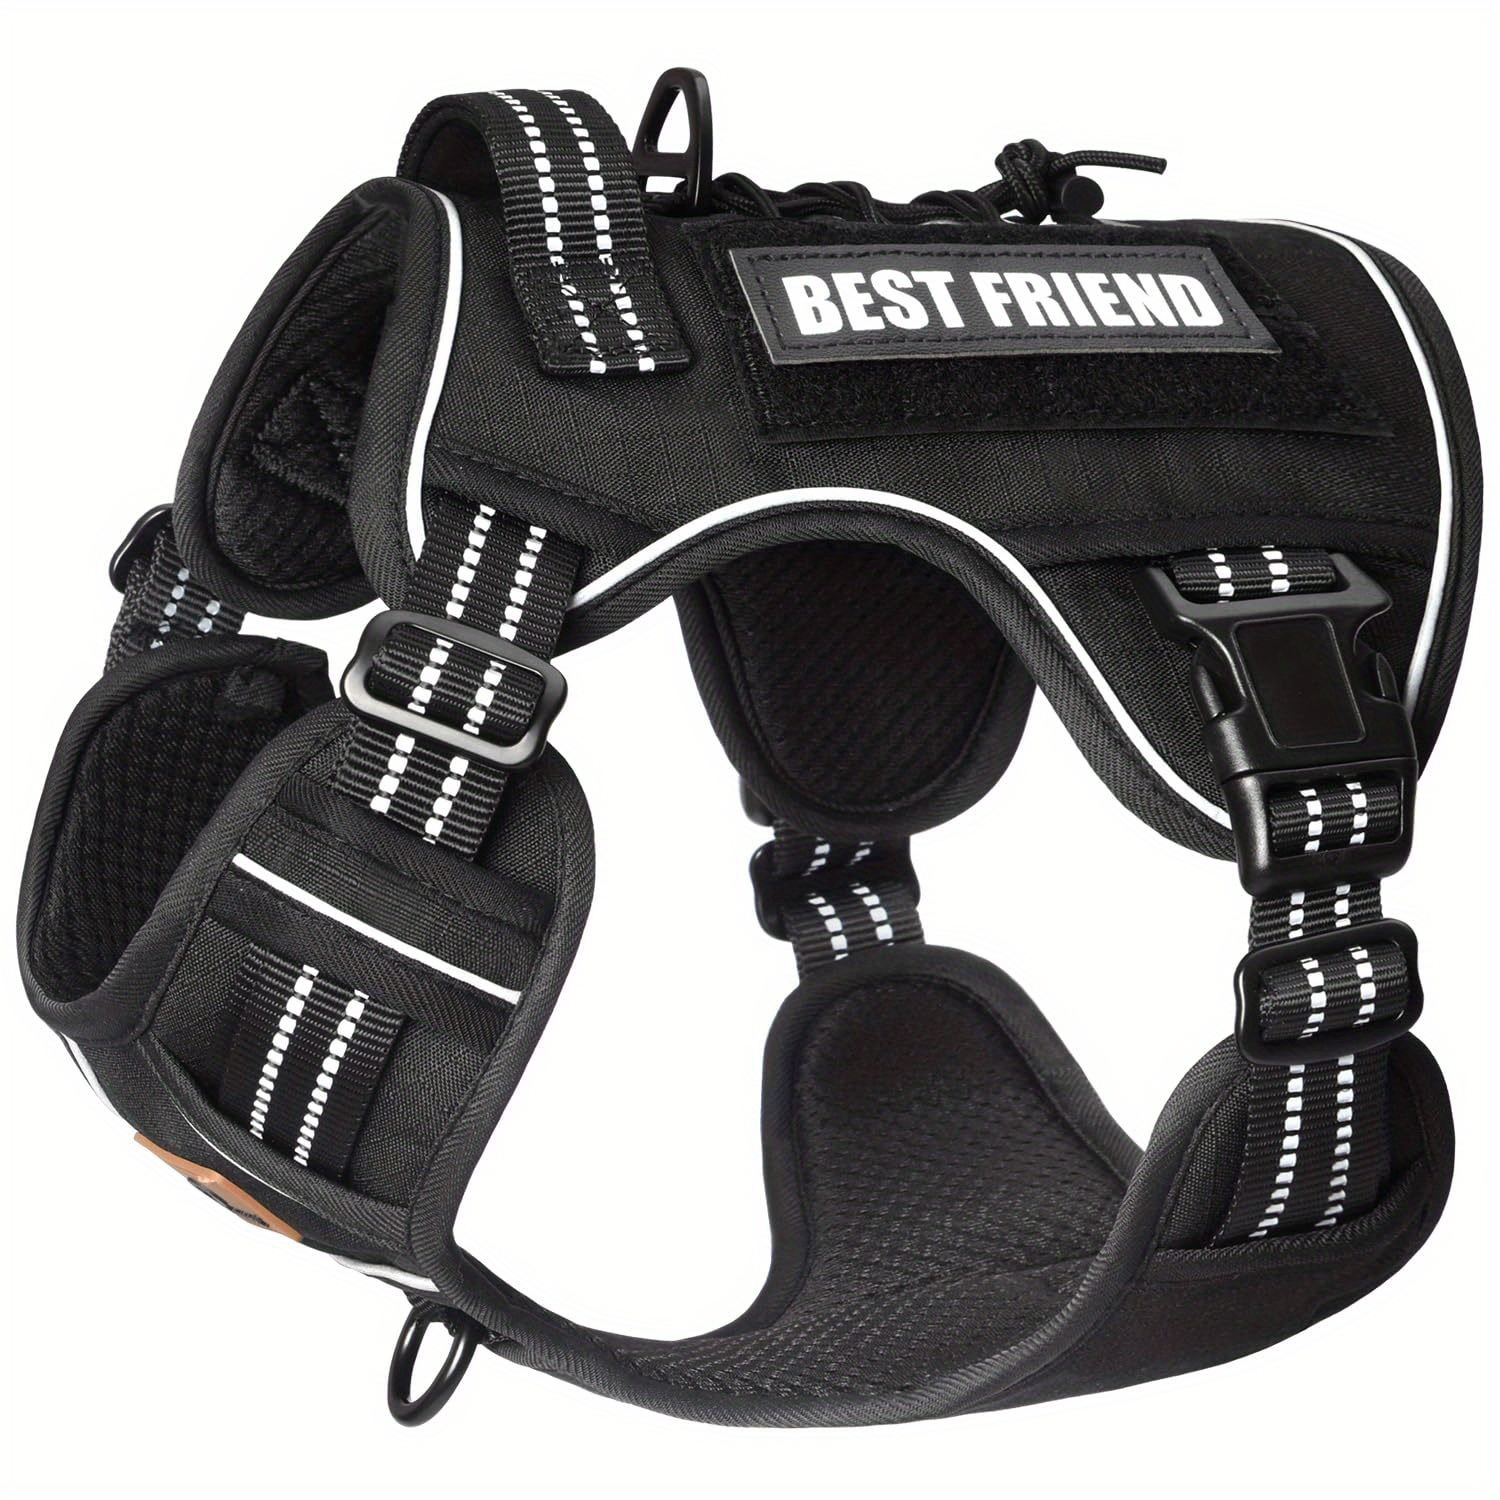 

Tactical Dog Harness For Dogs, No Pull Military Dog Vest, Adjustable Breathable Reflective Reinforced For Outing Walking Training Hunting